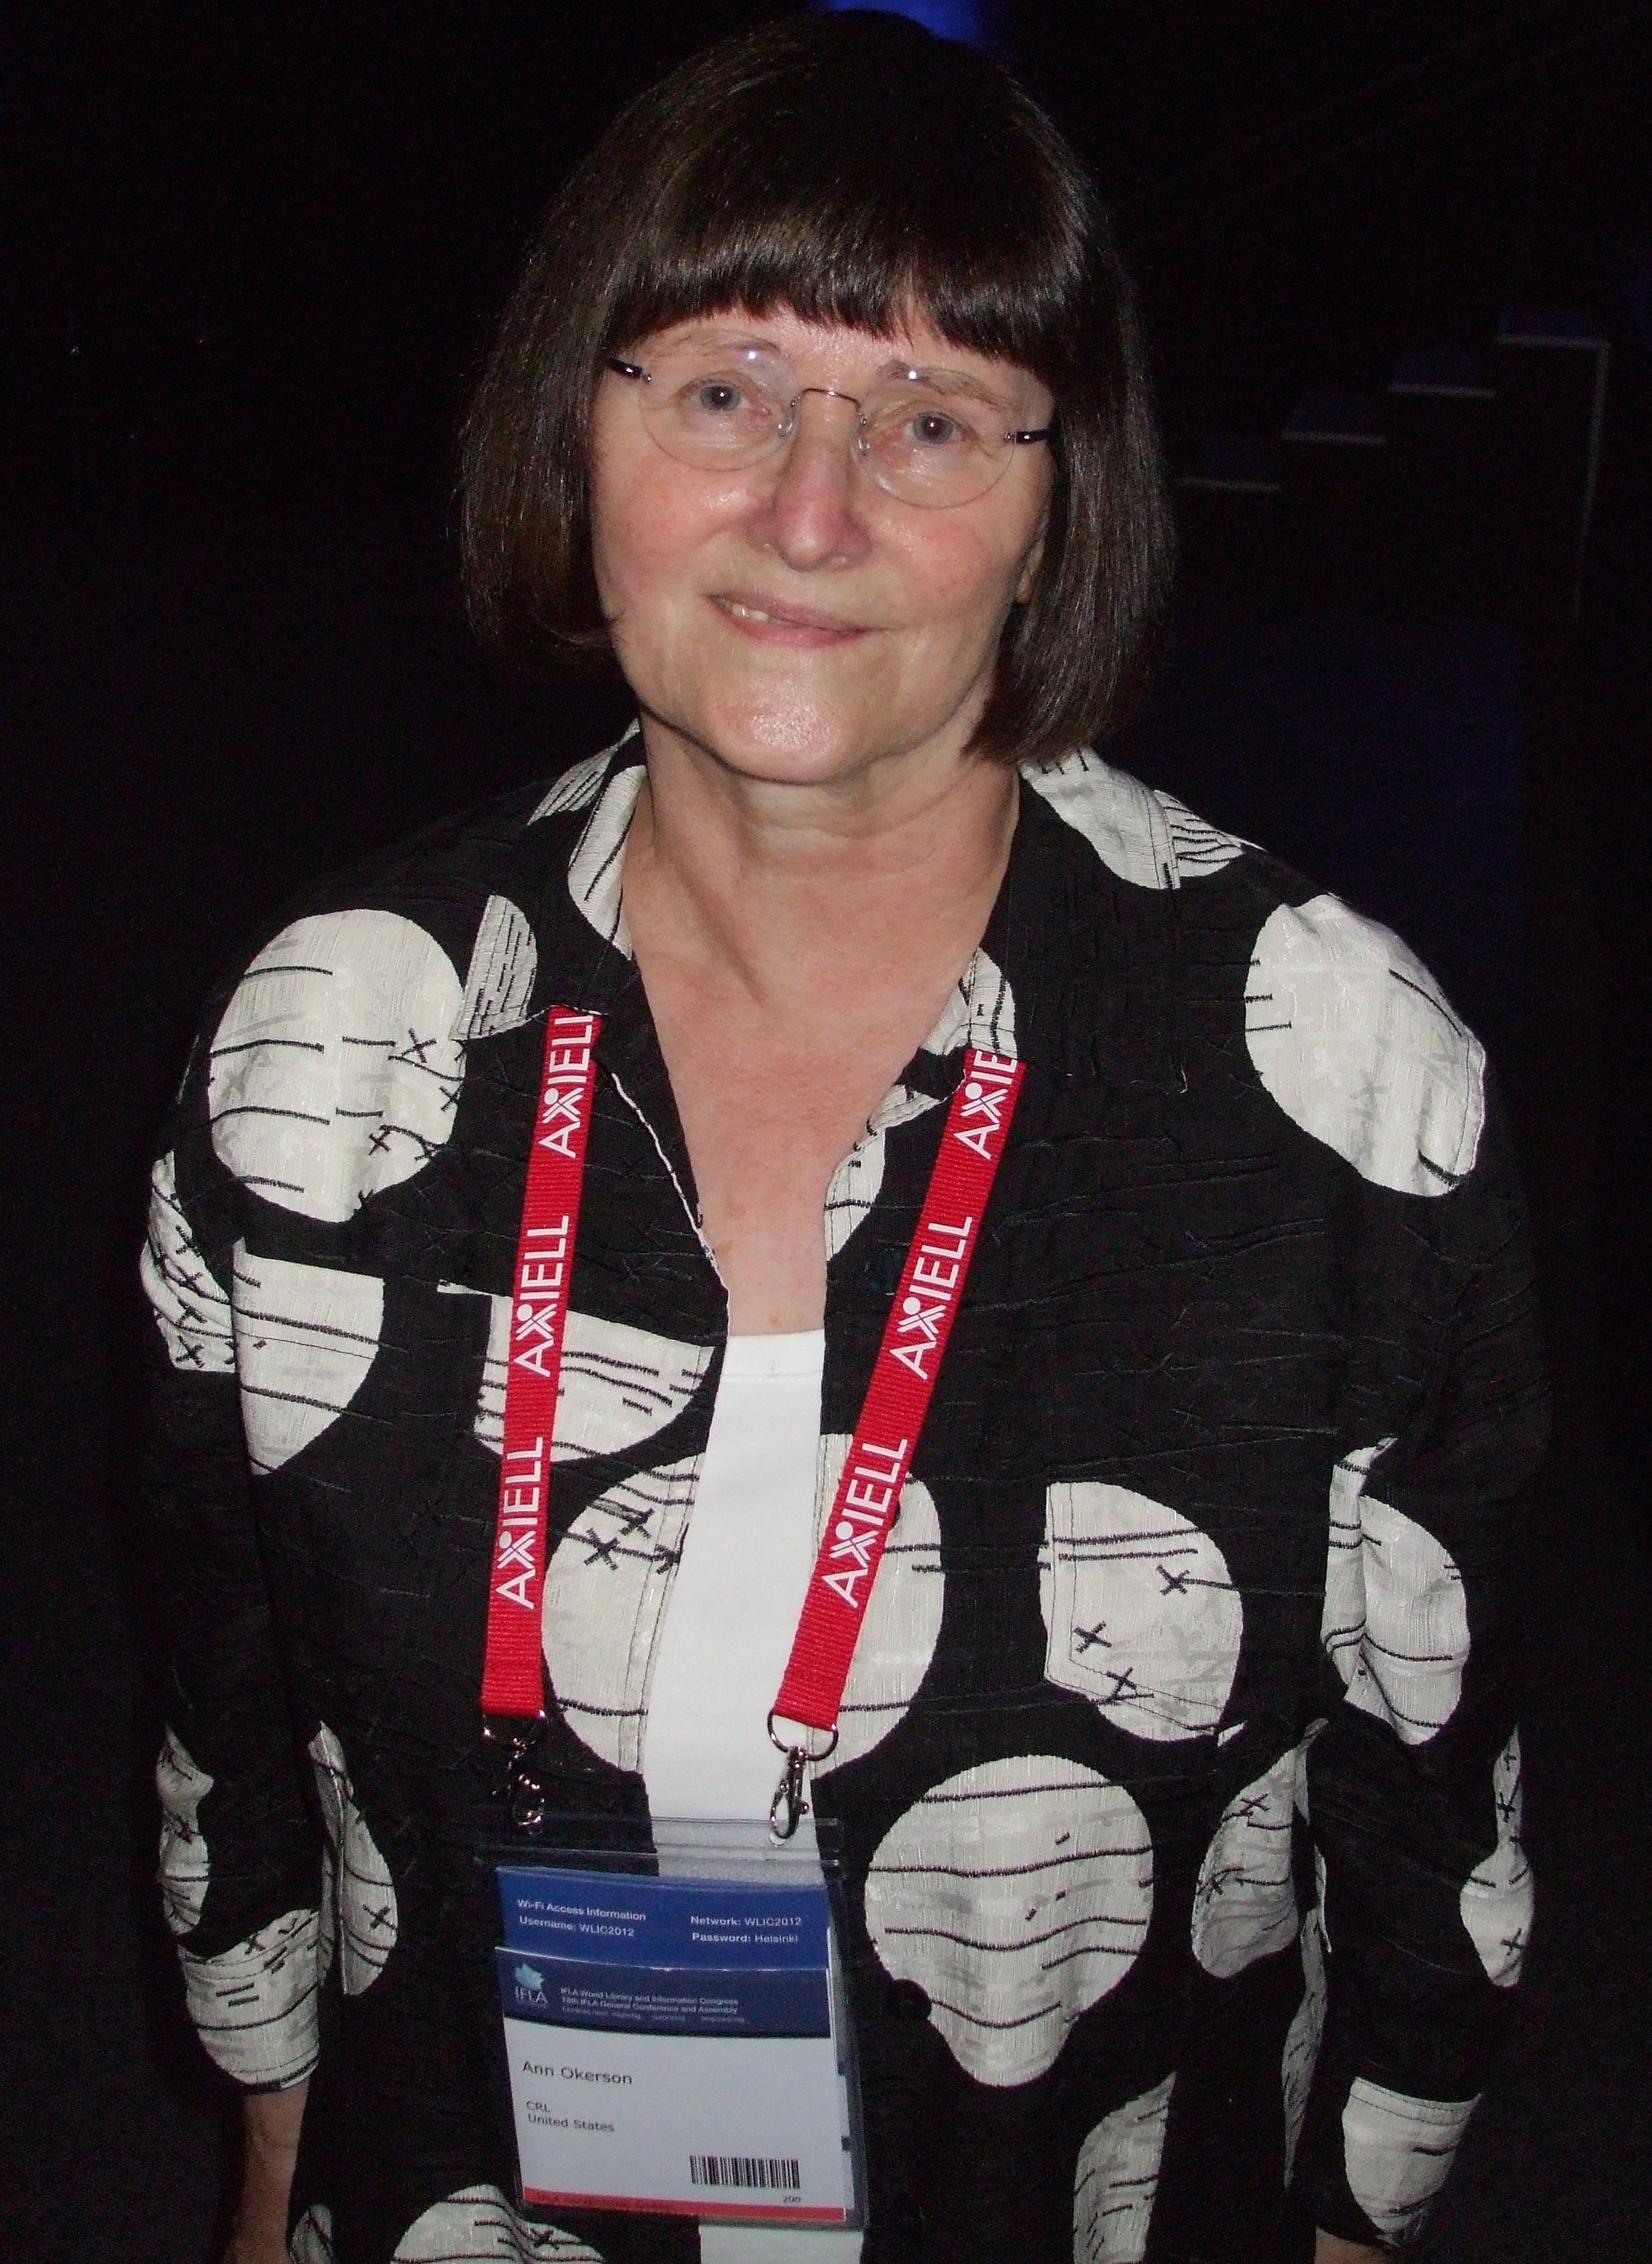 US delegate Ann Okerson serves on the IFLA Governing Board.